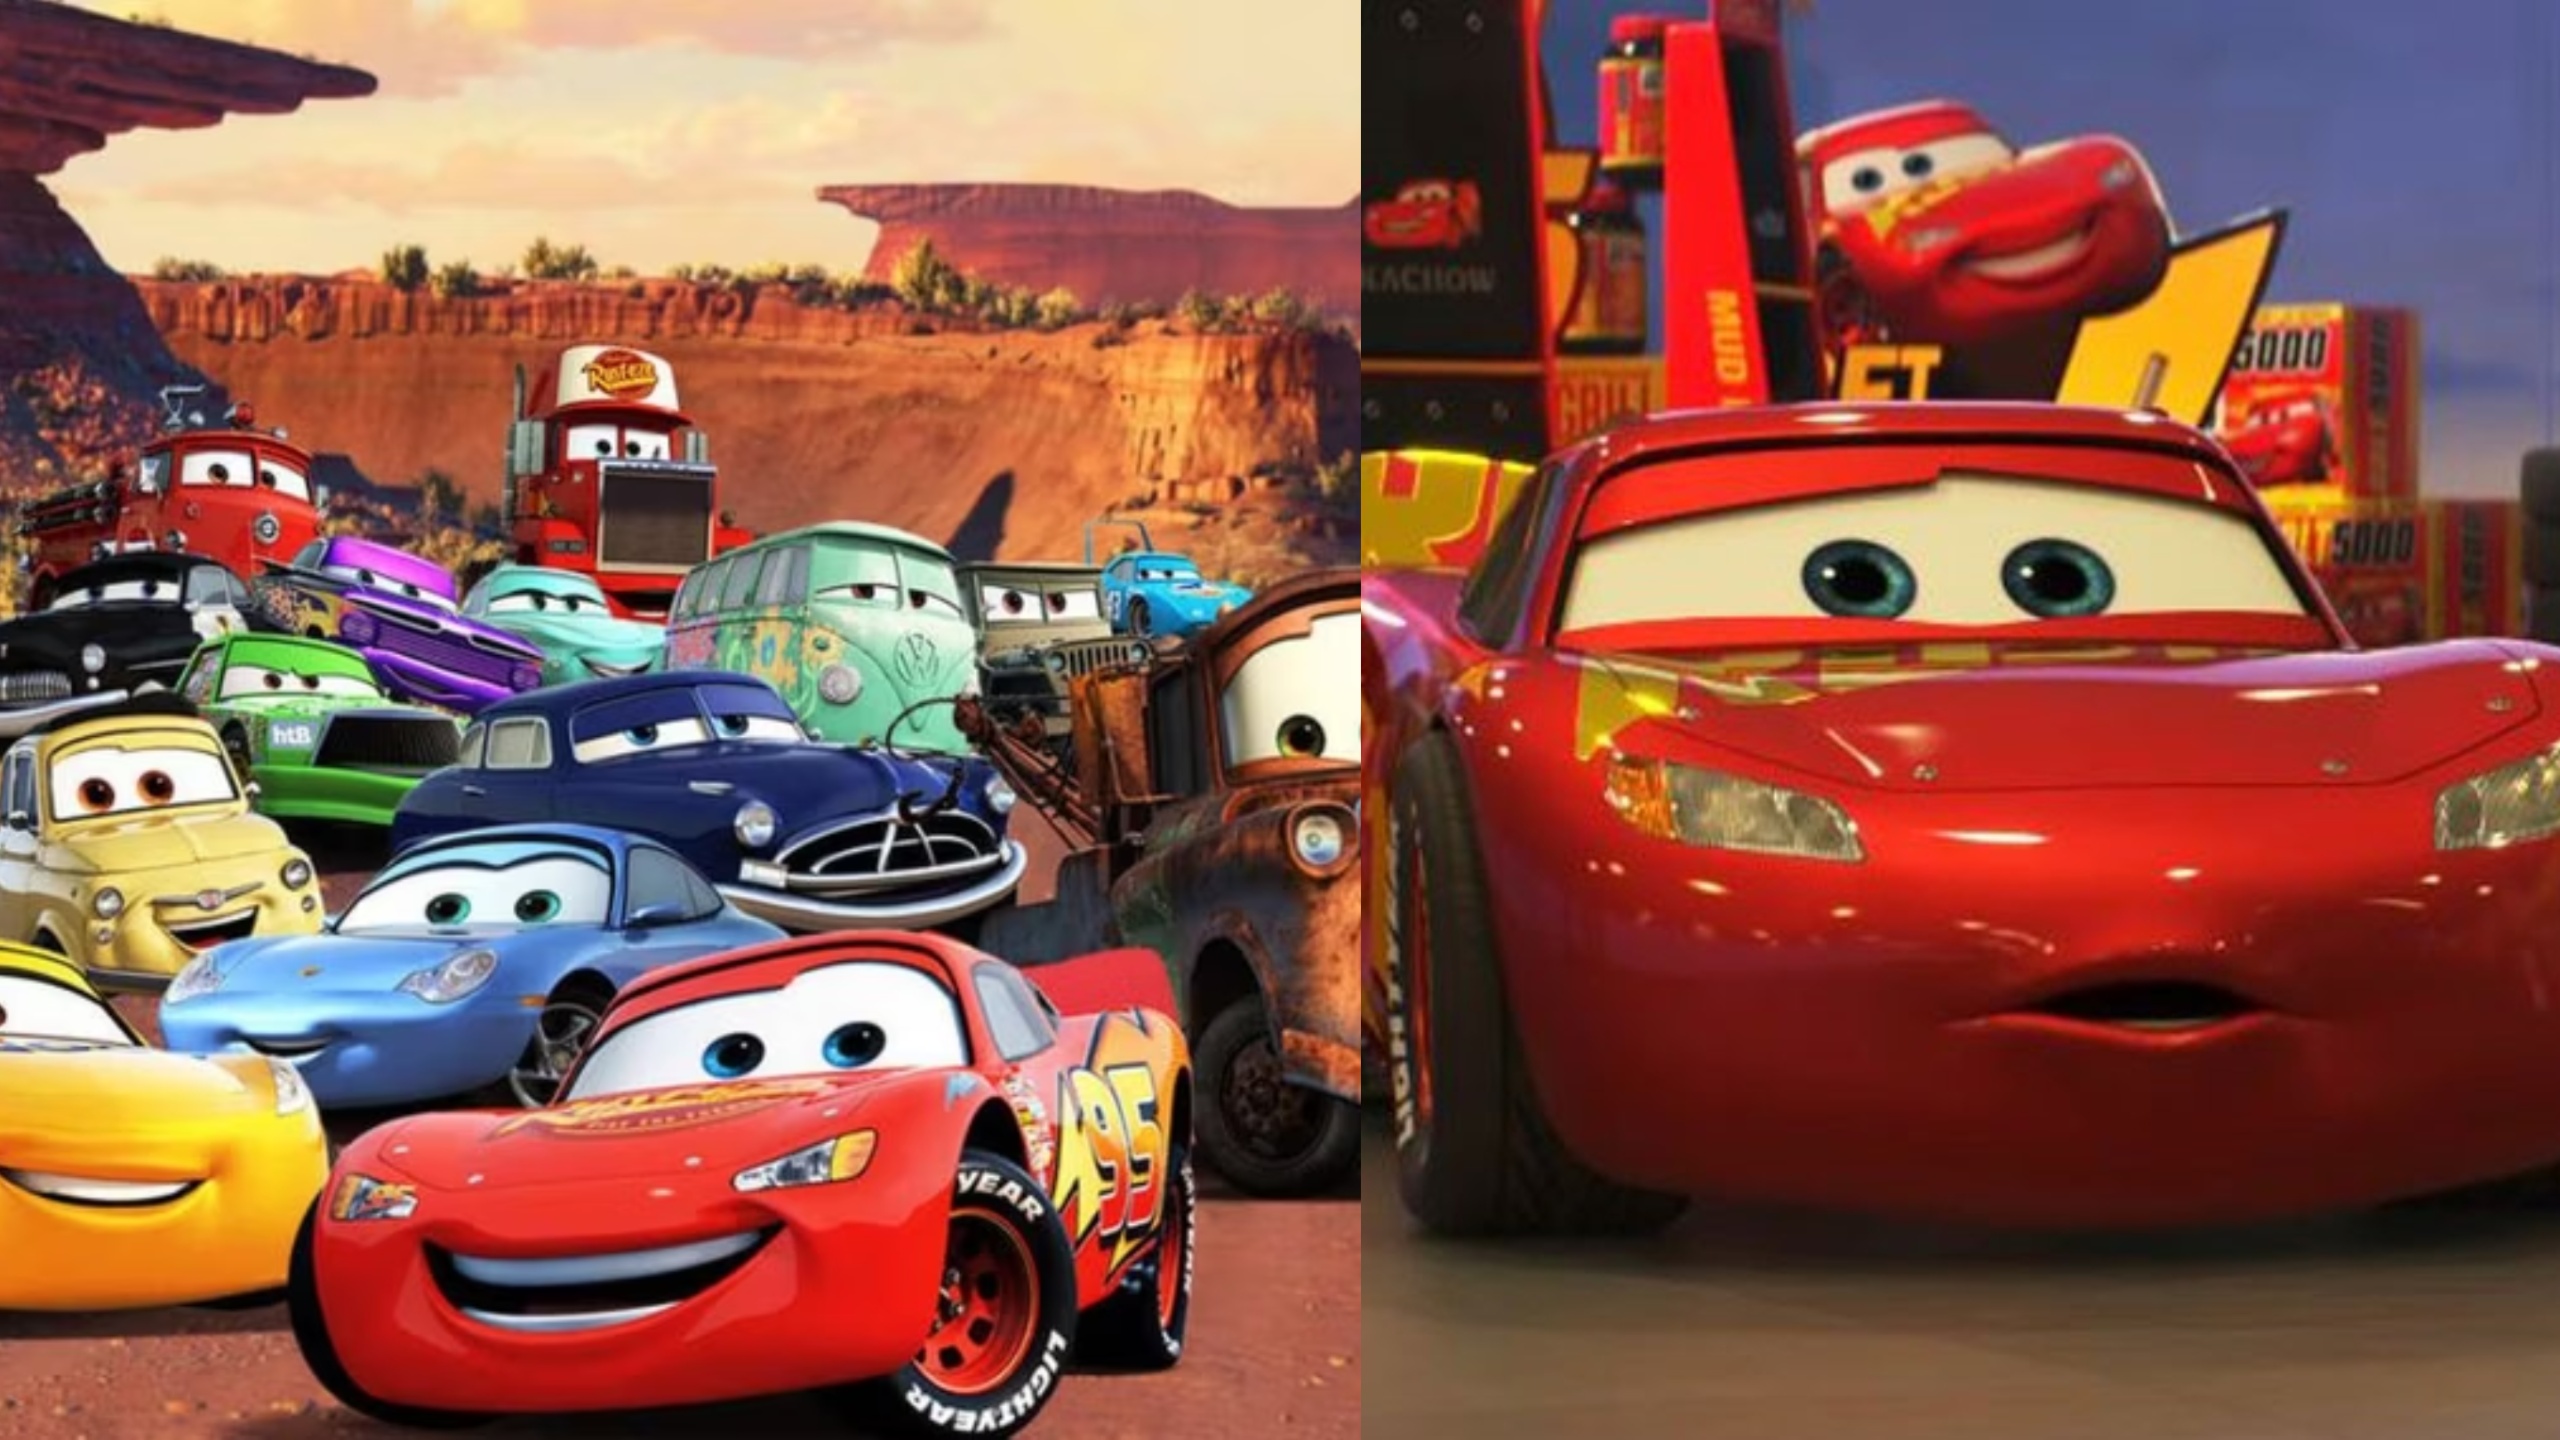 Cars will be back with new sequel.